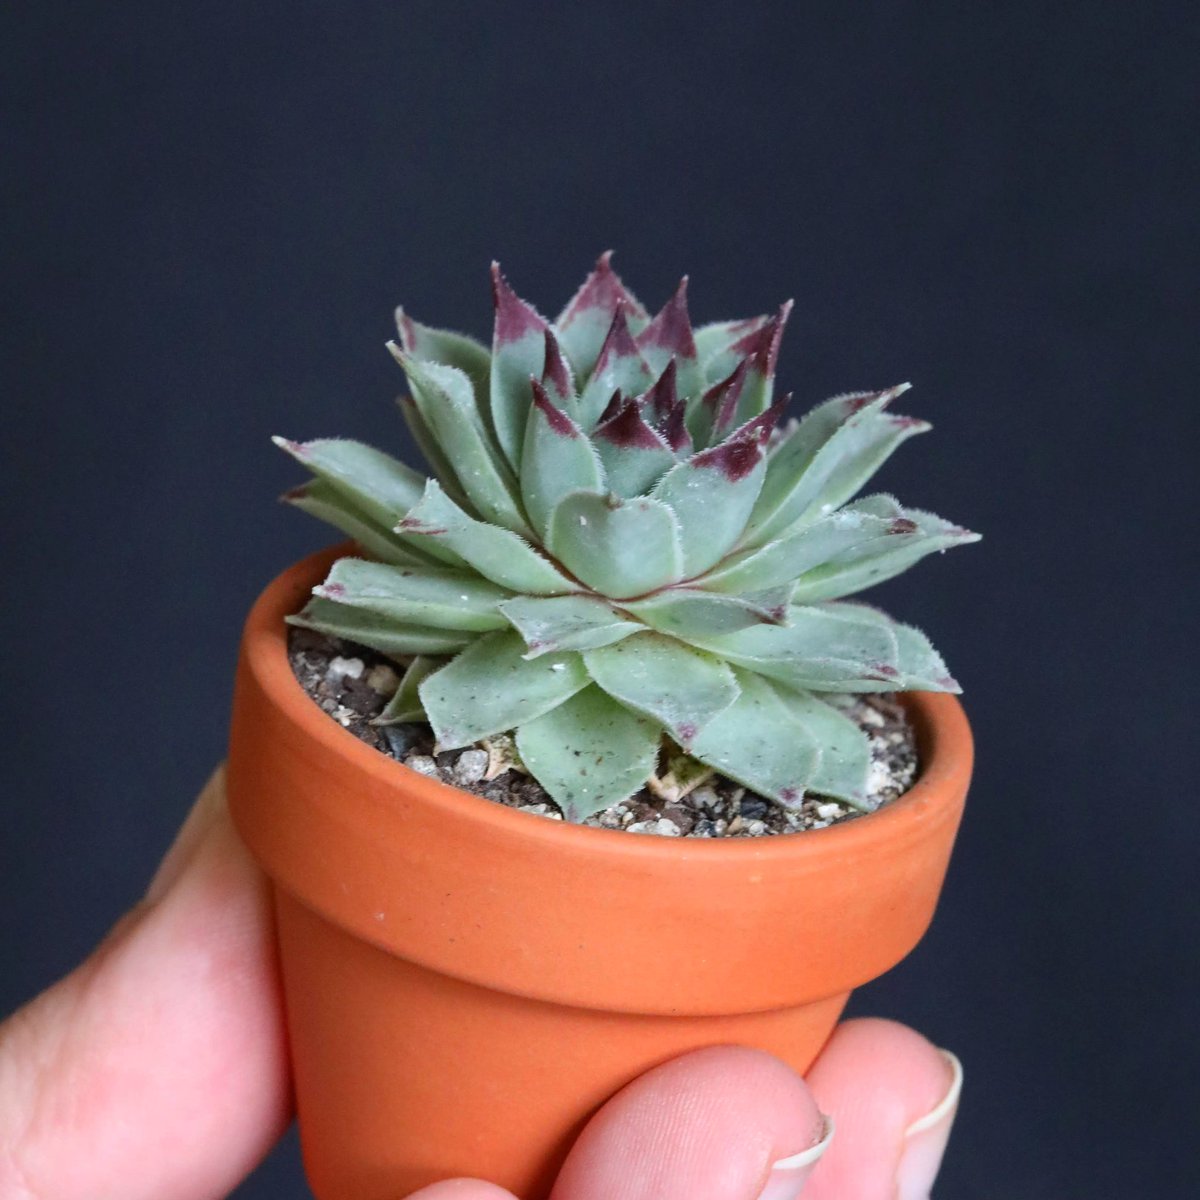 No idea what the correct ID for this one is, but it's so cute in her littlest clay pot.
#succulents
#suckerforsucculents
#ilovesucculents
#succulentslover
#lovesucculents
#succulentsmakemehappy 
#succulentscollection
#plants
#plantas
#houseplants
#greenthumb
#plantlover